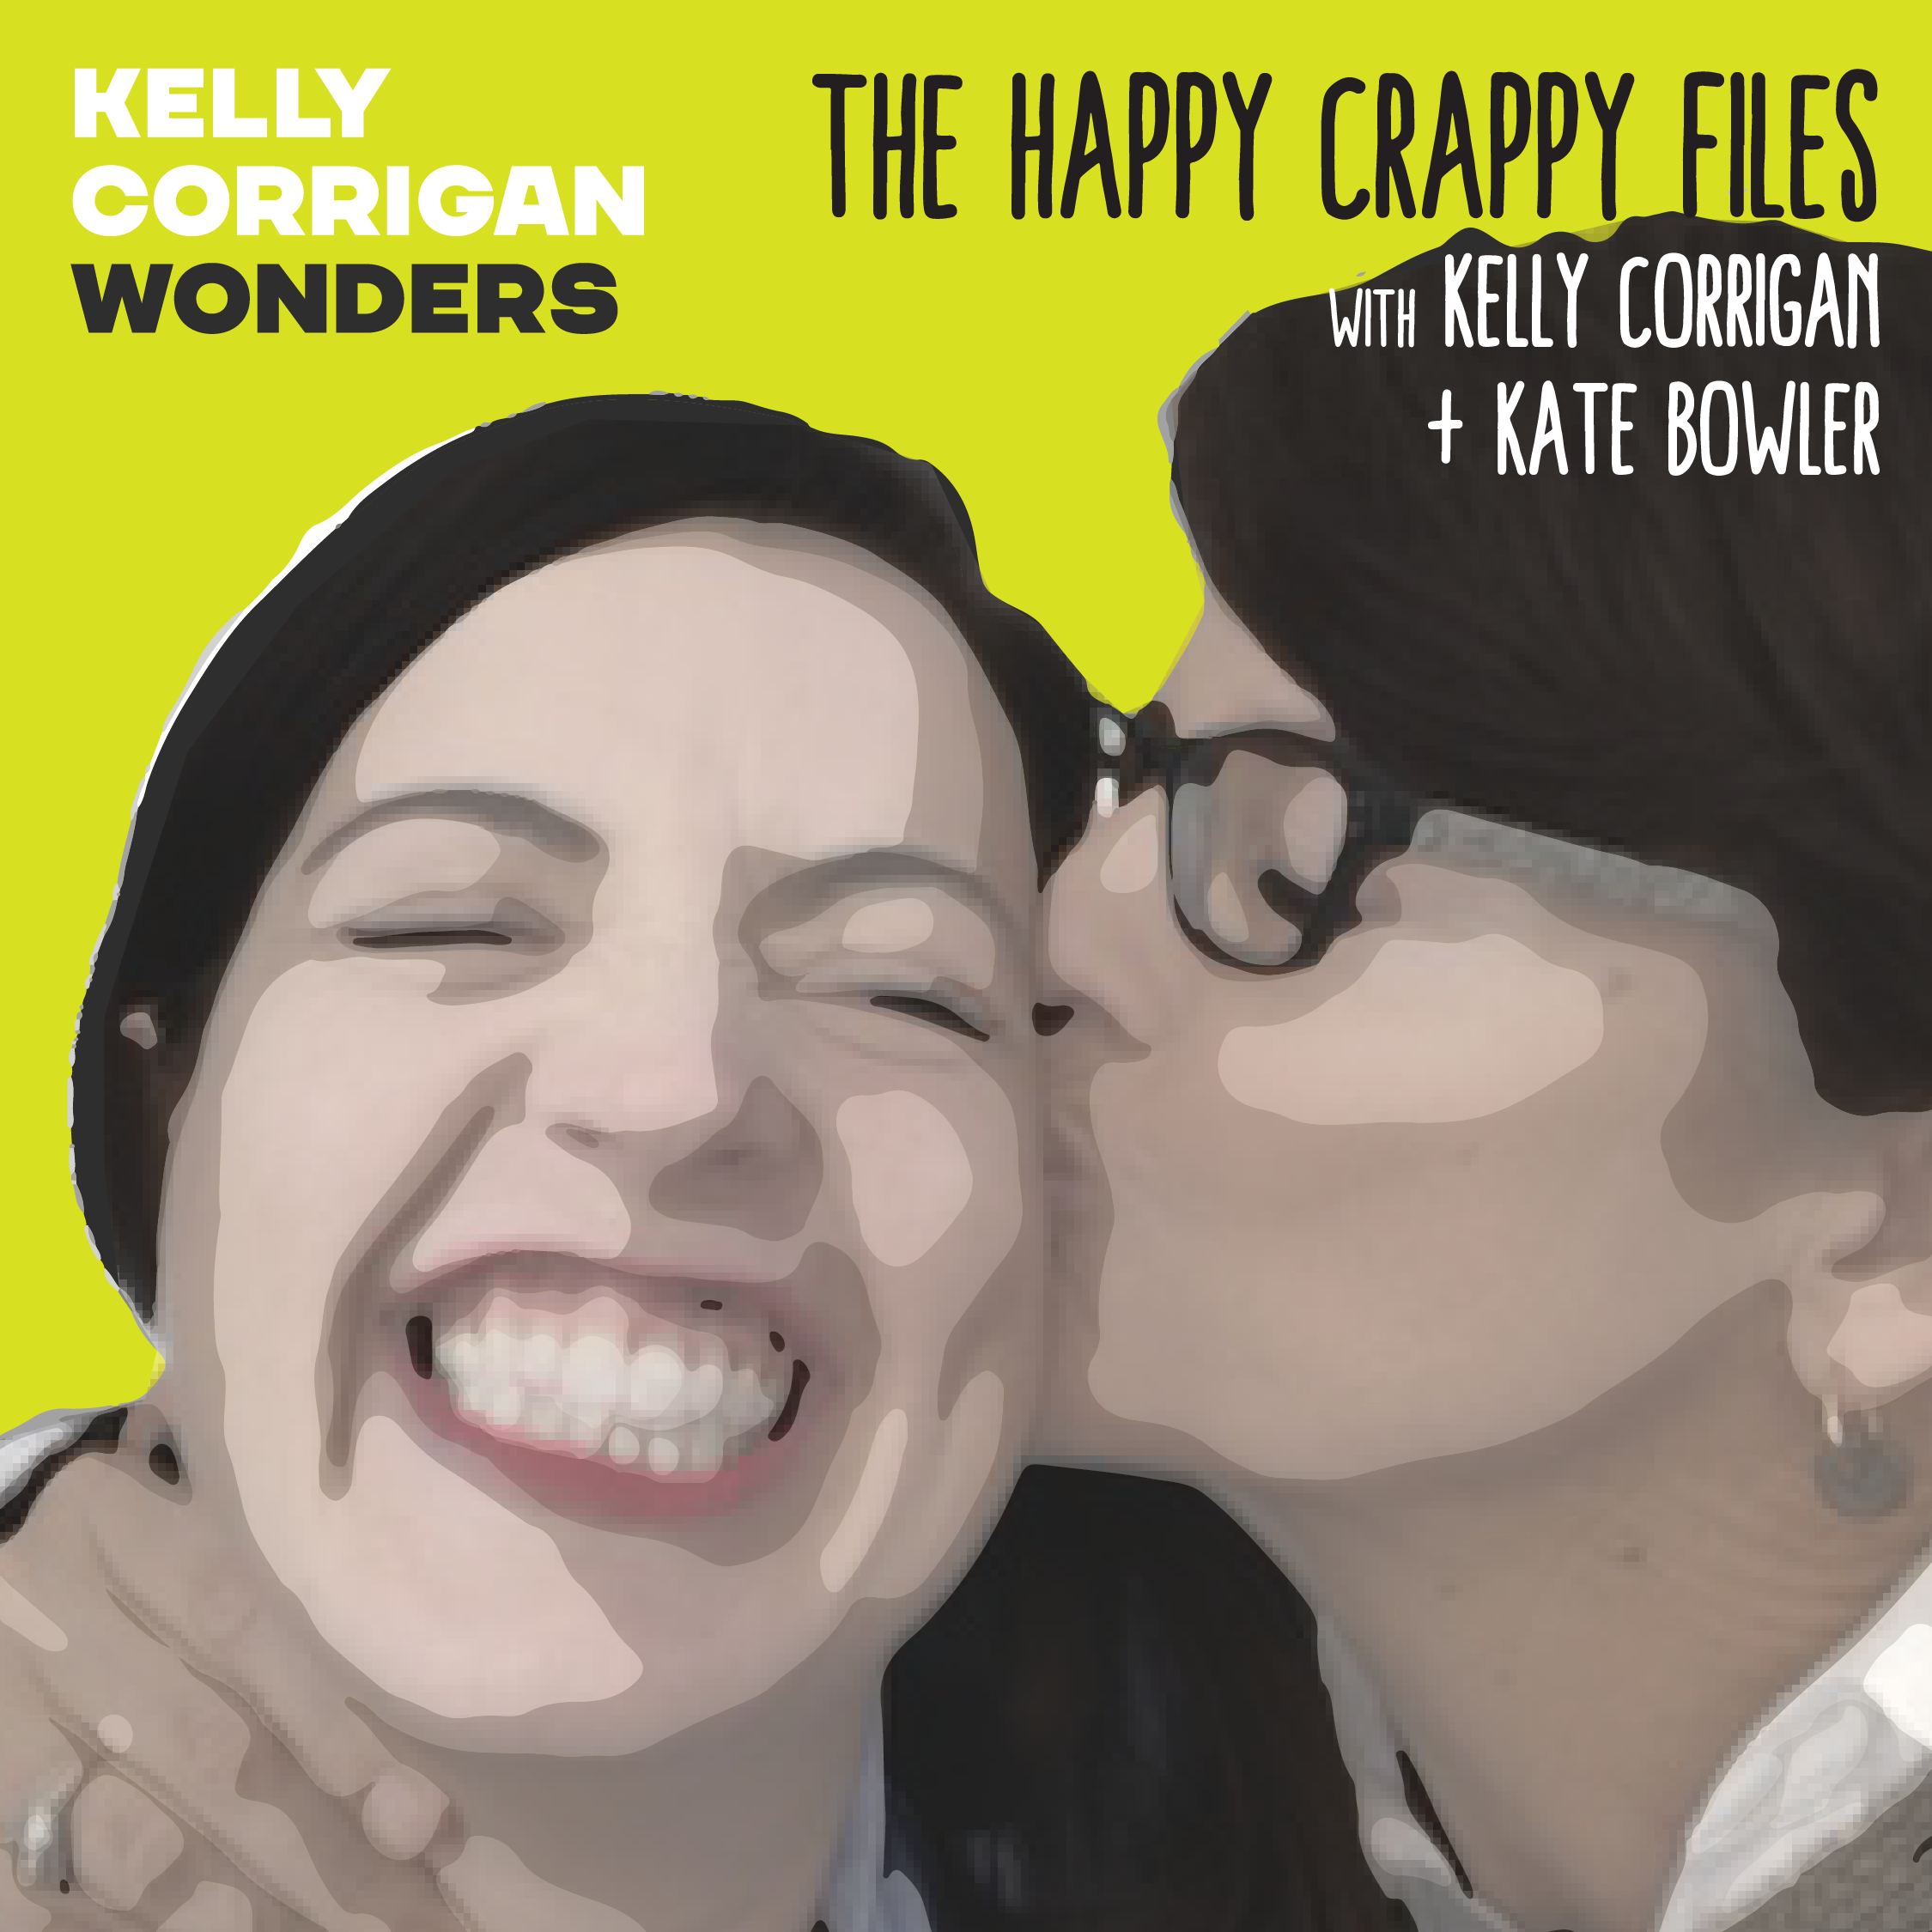 Looking Back with Kate Bowler at the Truly Crappy